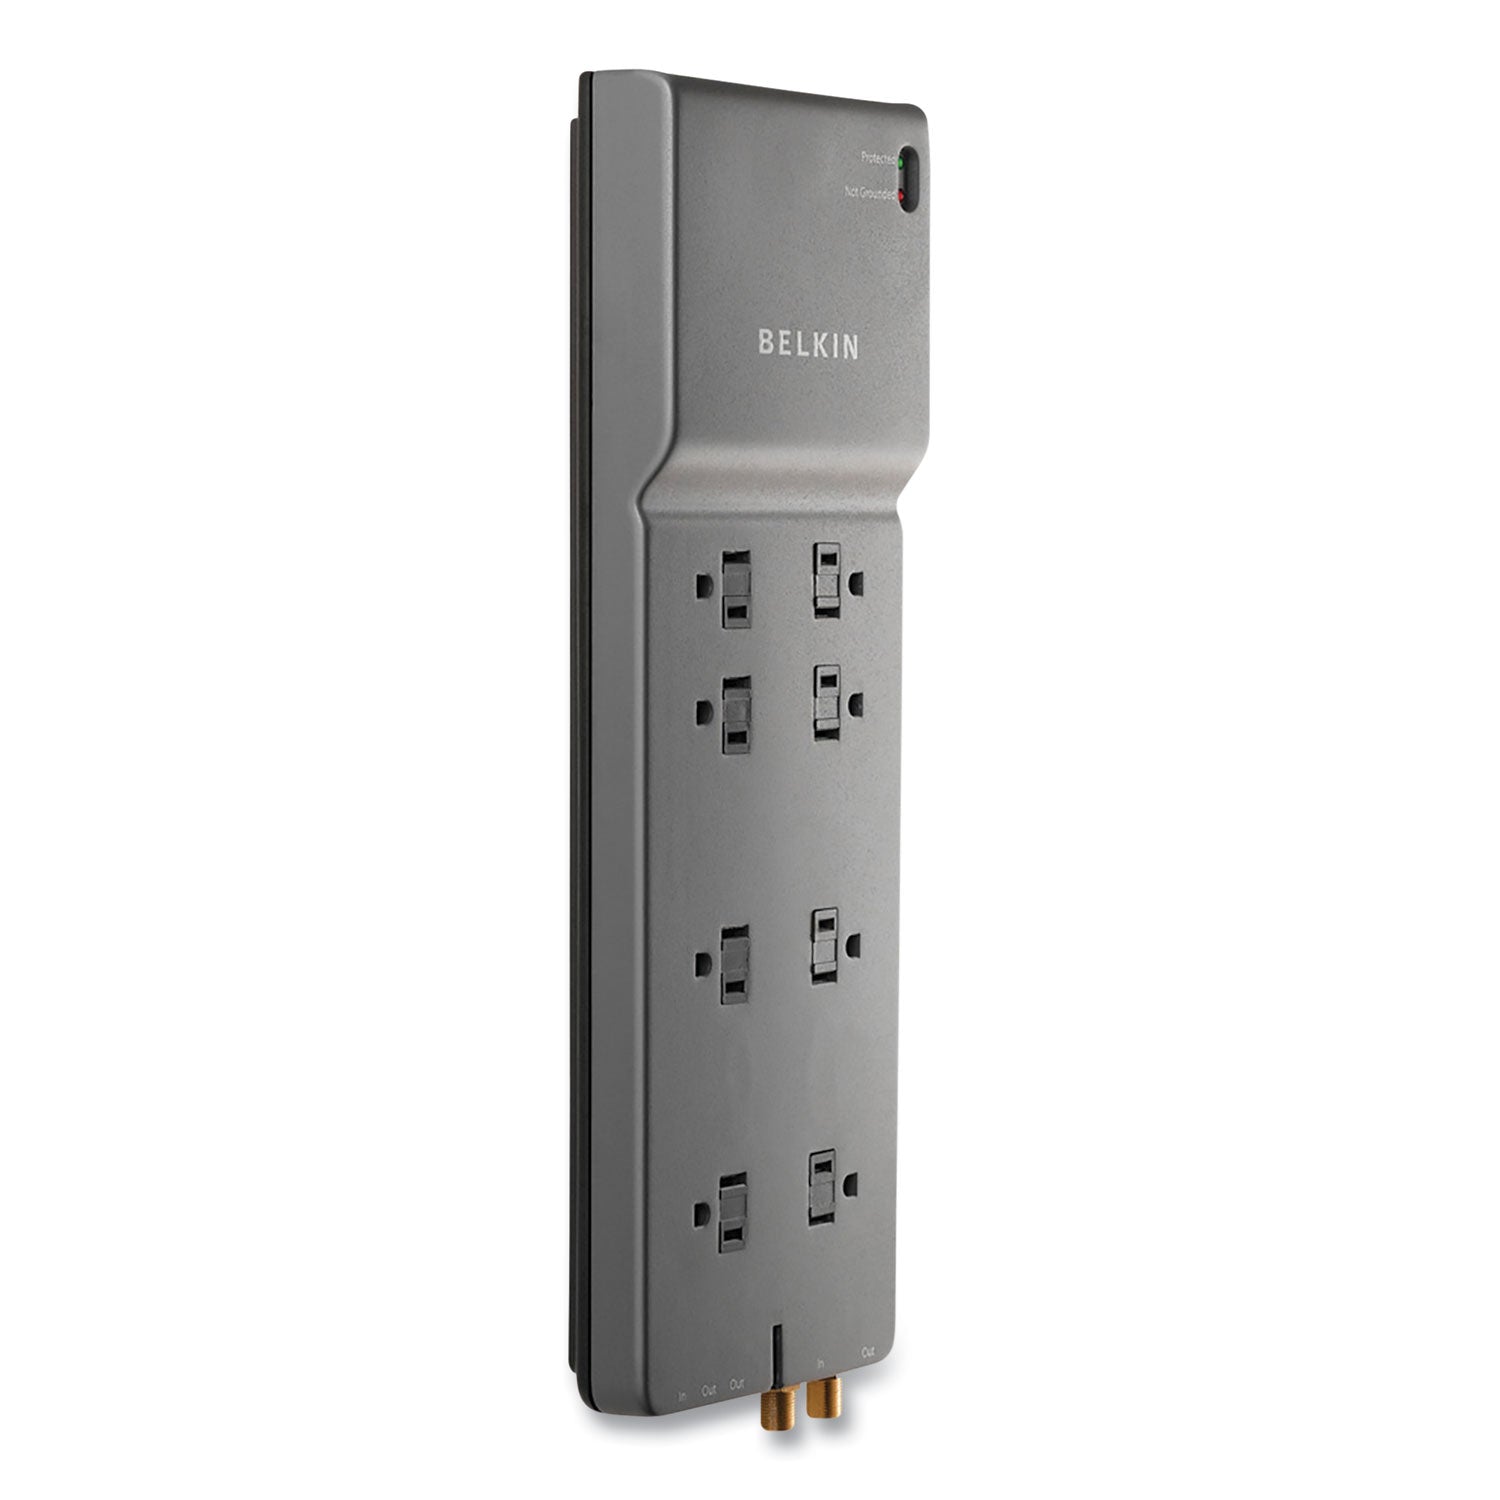 Home/Office Surge Protector, 8 AC Outlets, 12 ft Cord, 3,390 J, Dark Gray - 